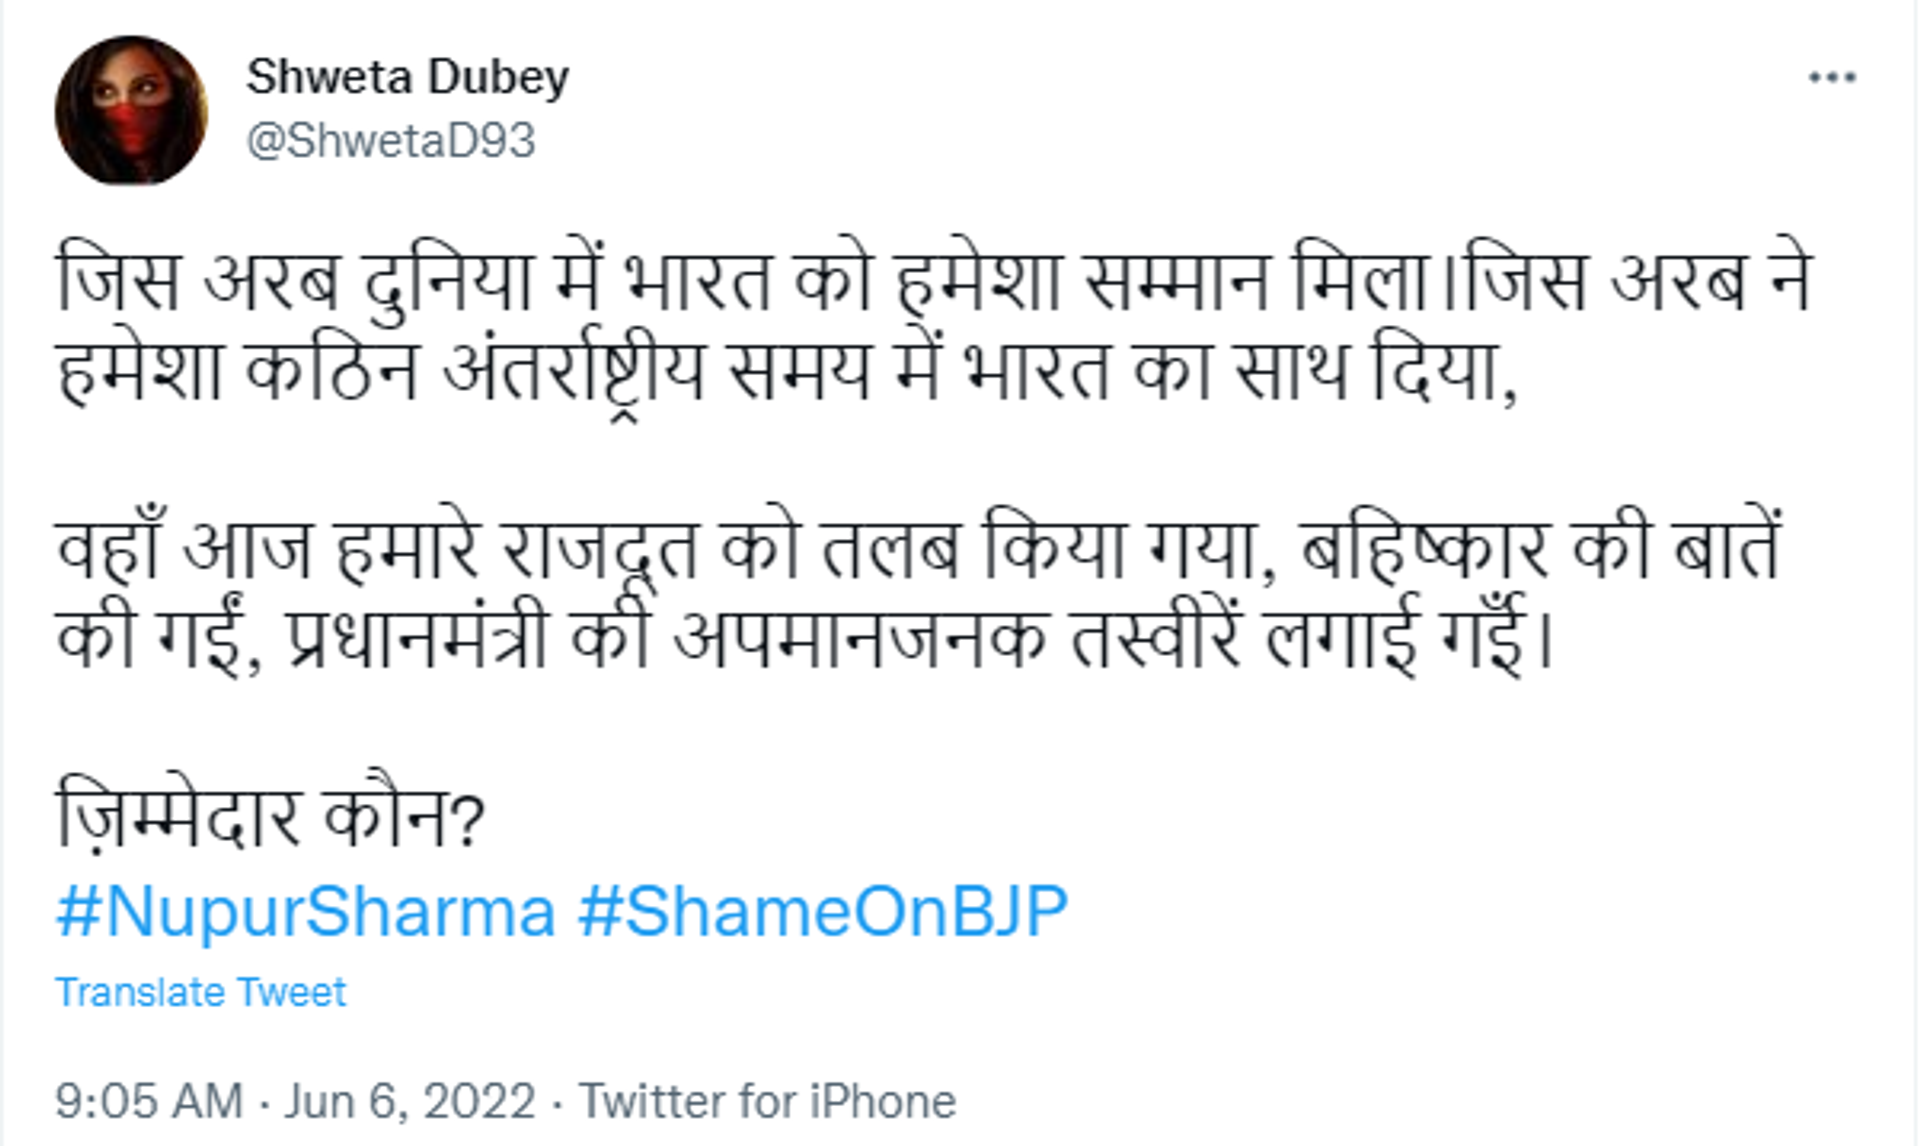 A Social Media User Slams Nupur Sharma for Letting Down India in front of Gulf Countries - Sputnik International, 1920, 06.06.2022